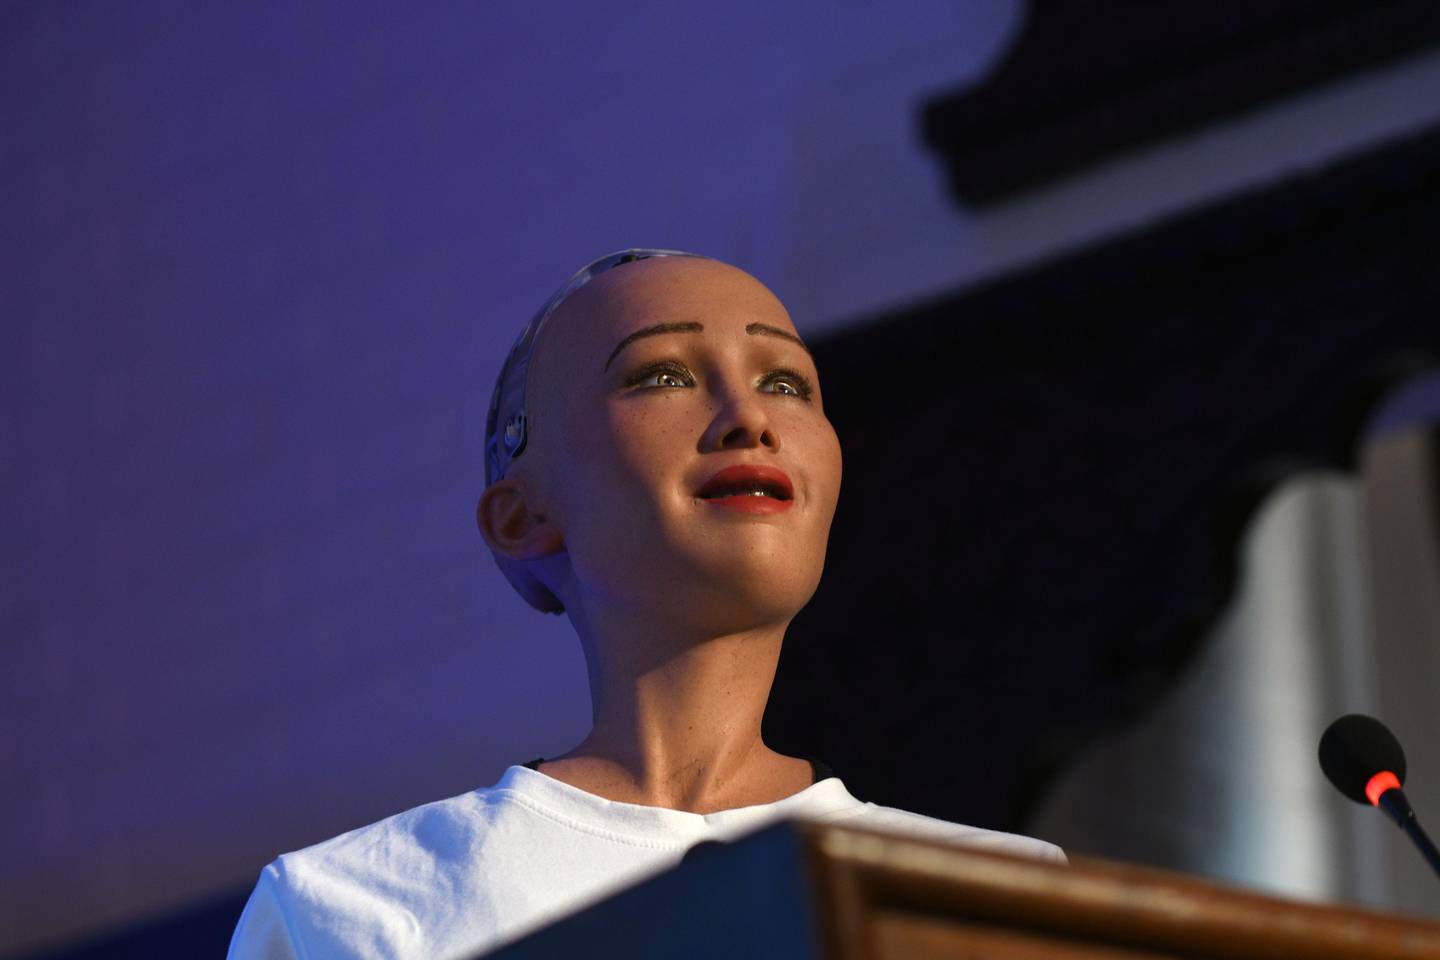 Humanoid robot Sophia speaks at a conference on using technology for public services in Kathmandu on March 21, 2018.
Sophia, a robot created by Hanson Robotics, was named by UNDP as its first non-human Innovation Champion, in November 2017. / AFP PHOTO / PRAKASH MATHEMA